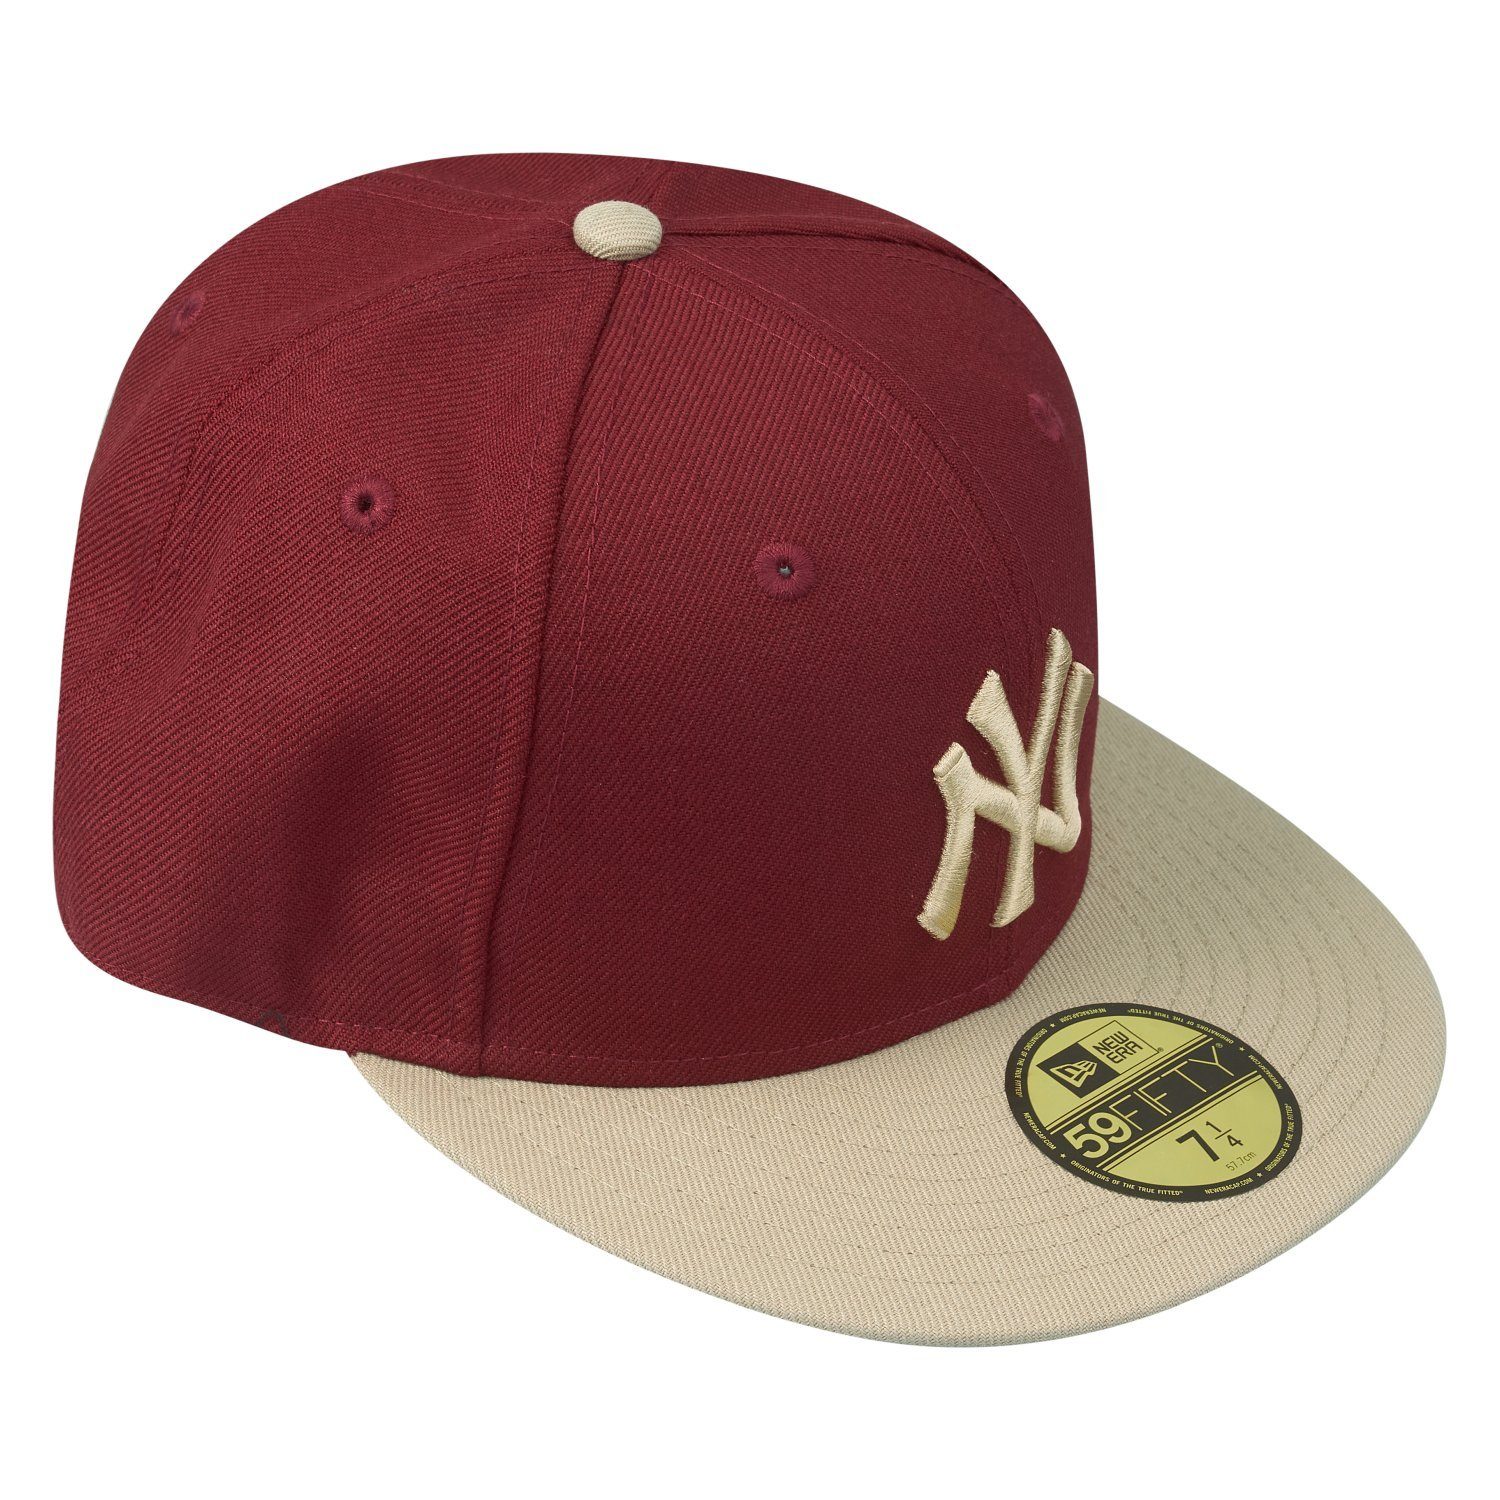 Era New New Yankees York cardinal 59Fifty Fitted Cap